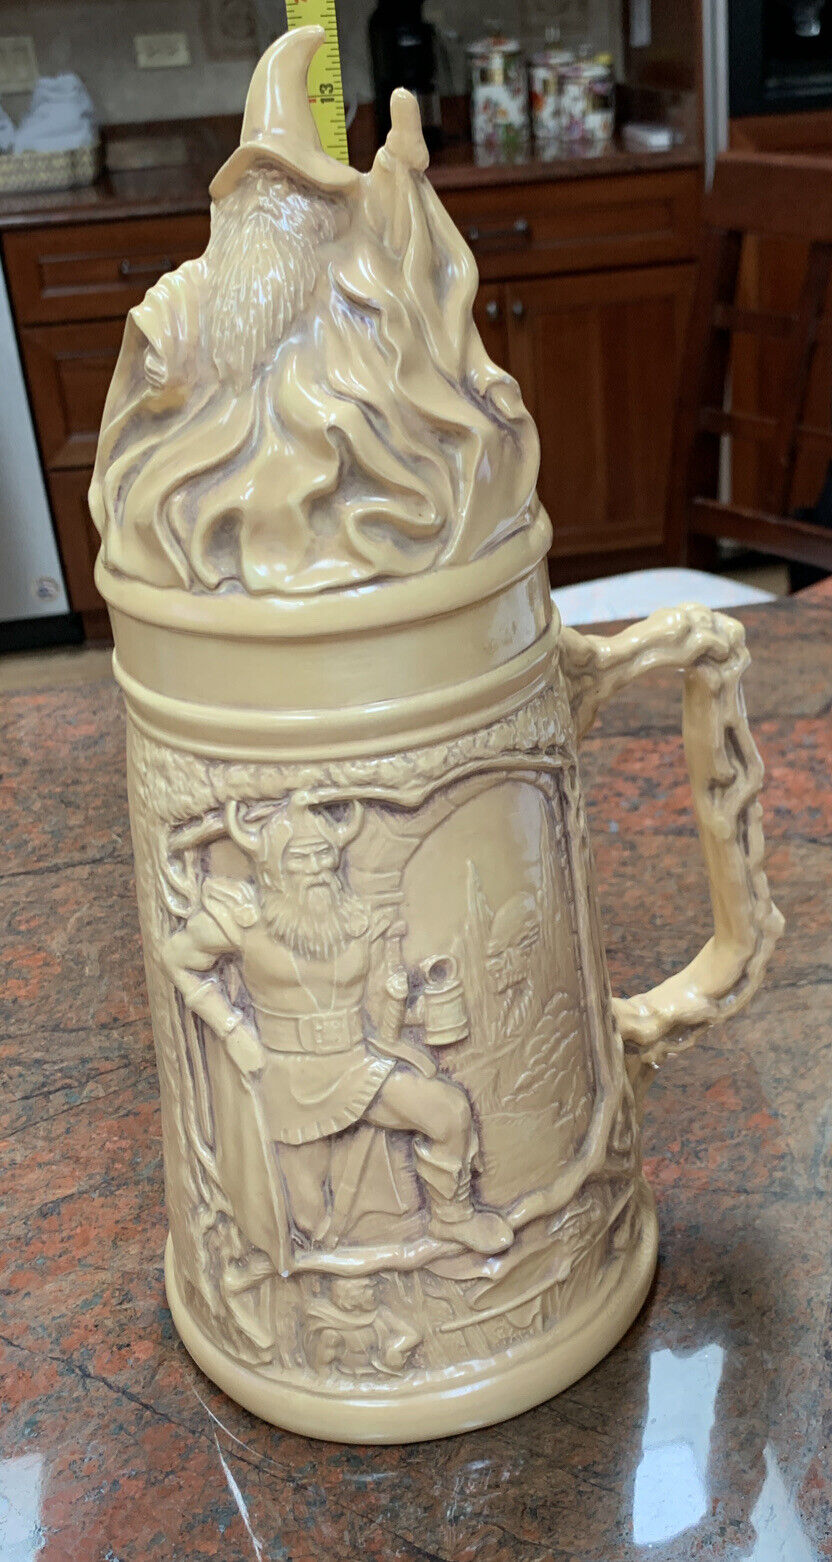 Lord Of The Rings Ceramic Collectible Tankard With Gandalf Lid; Unique Item